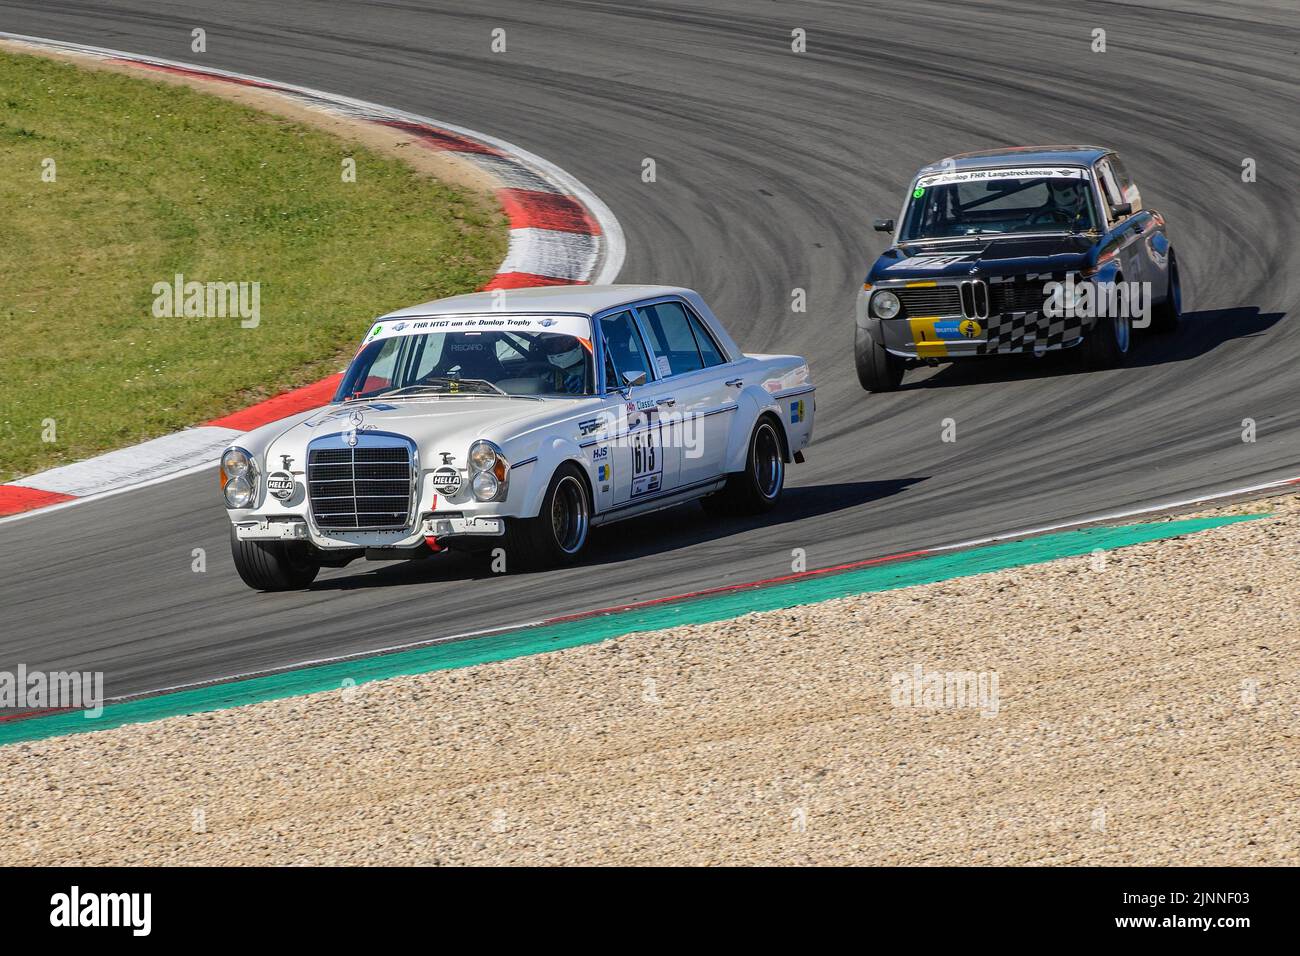 Historic race carDaimler-Benz 300 SEL 6, 3 behind BMW 2002 at car race for oldtimer youngtimer classic cars 24-hour race 24h race, Nuerburgring race Stock Photo